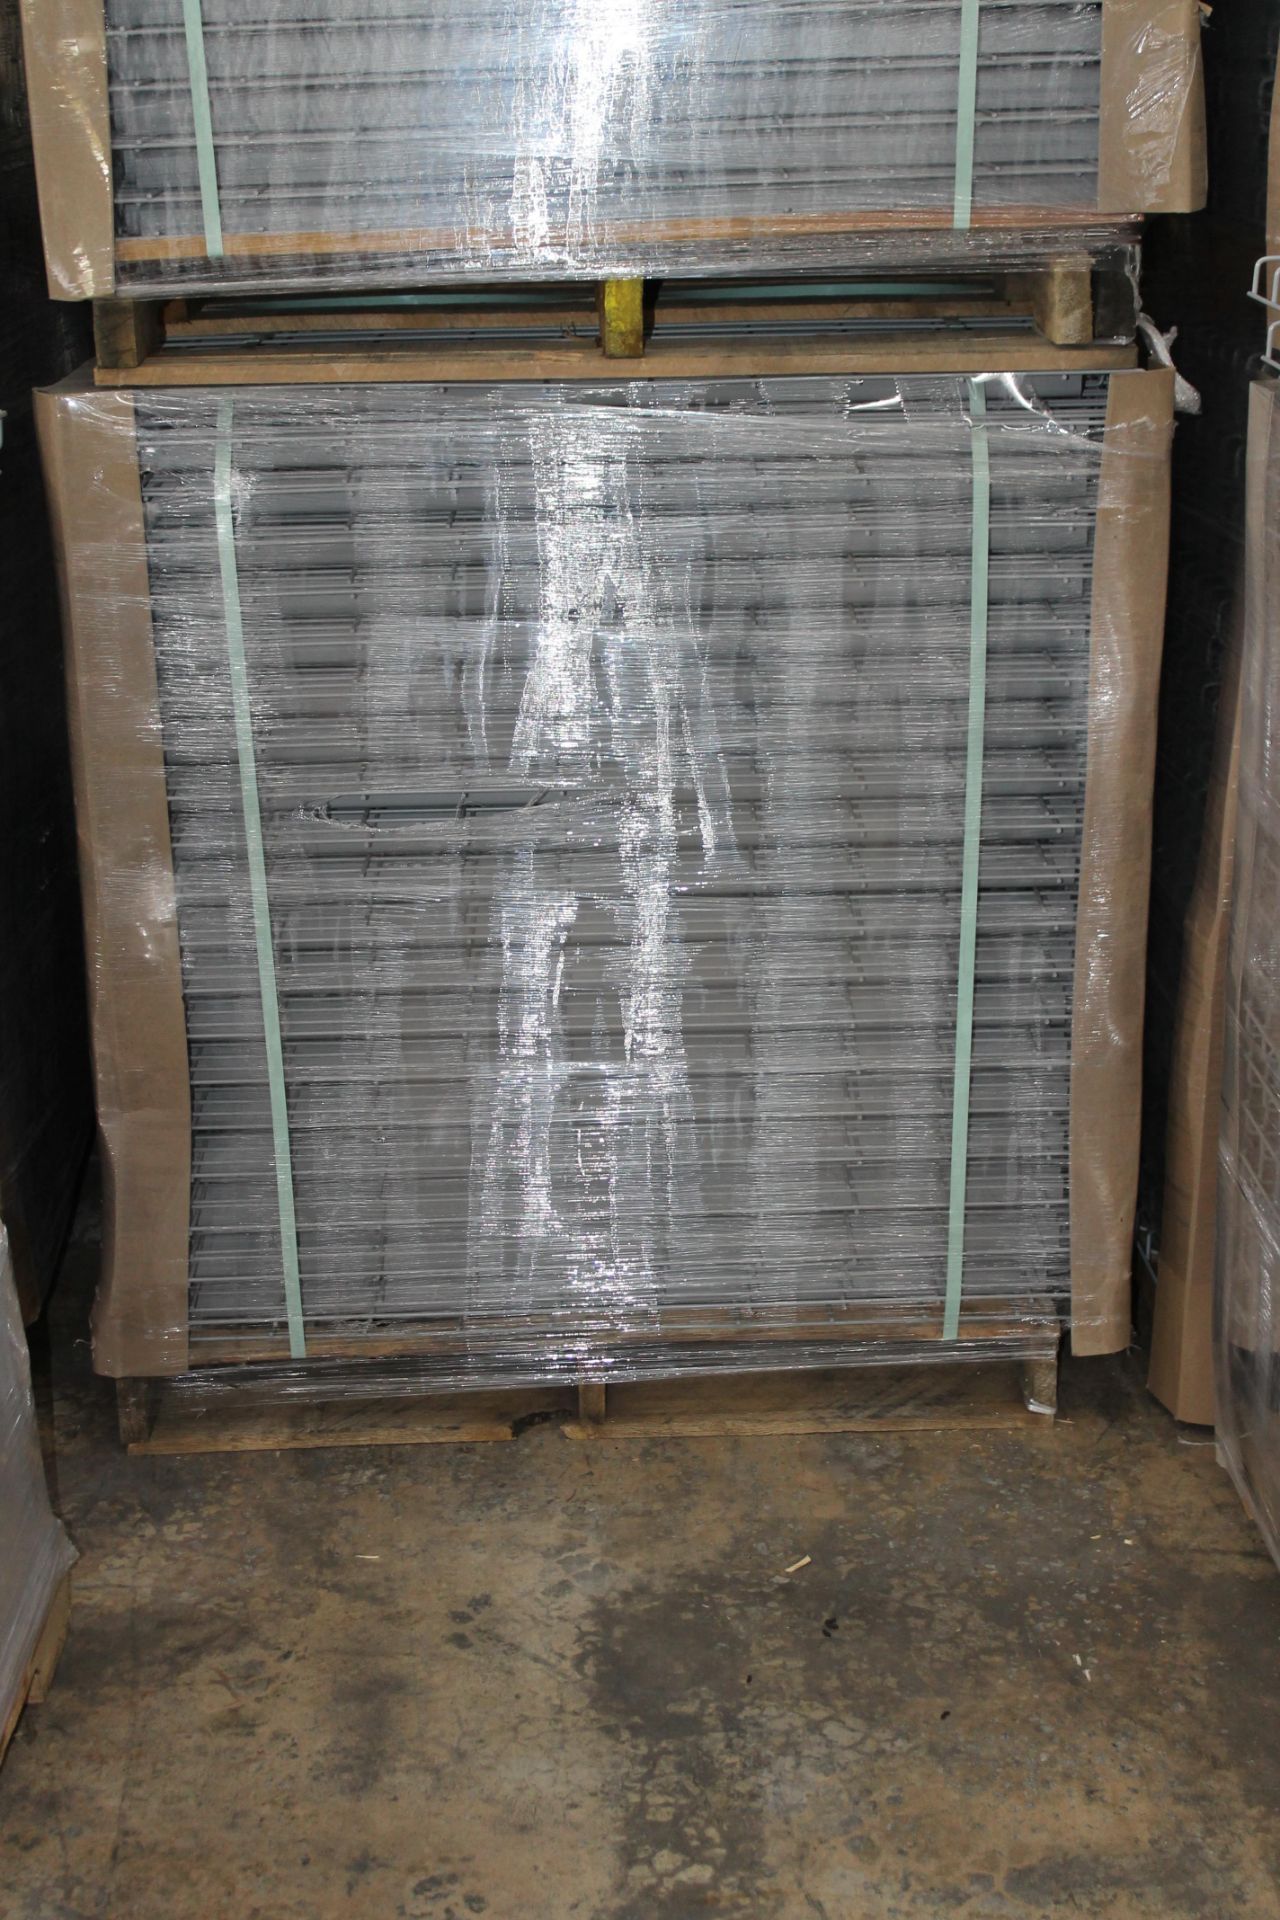 NEW 40 PCS OF STANDARD 42" X 46" WIREDECK - 2200 LBS CAPACITY